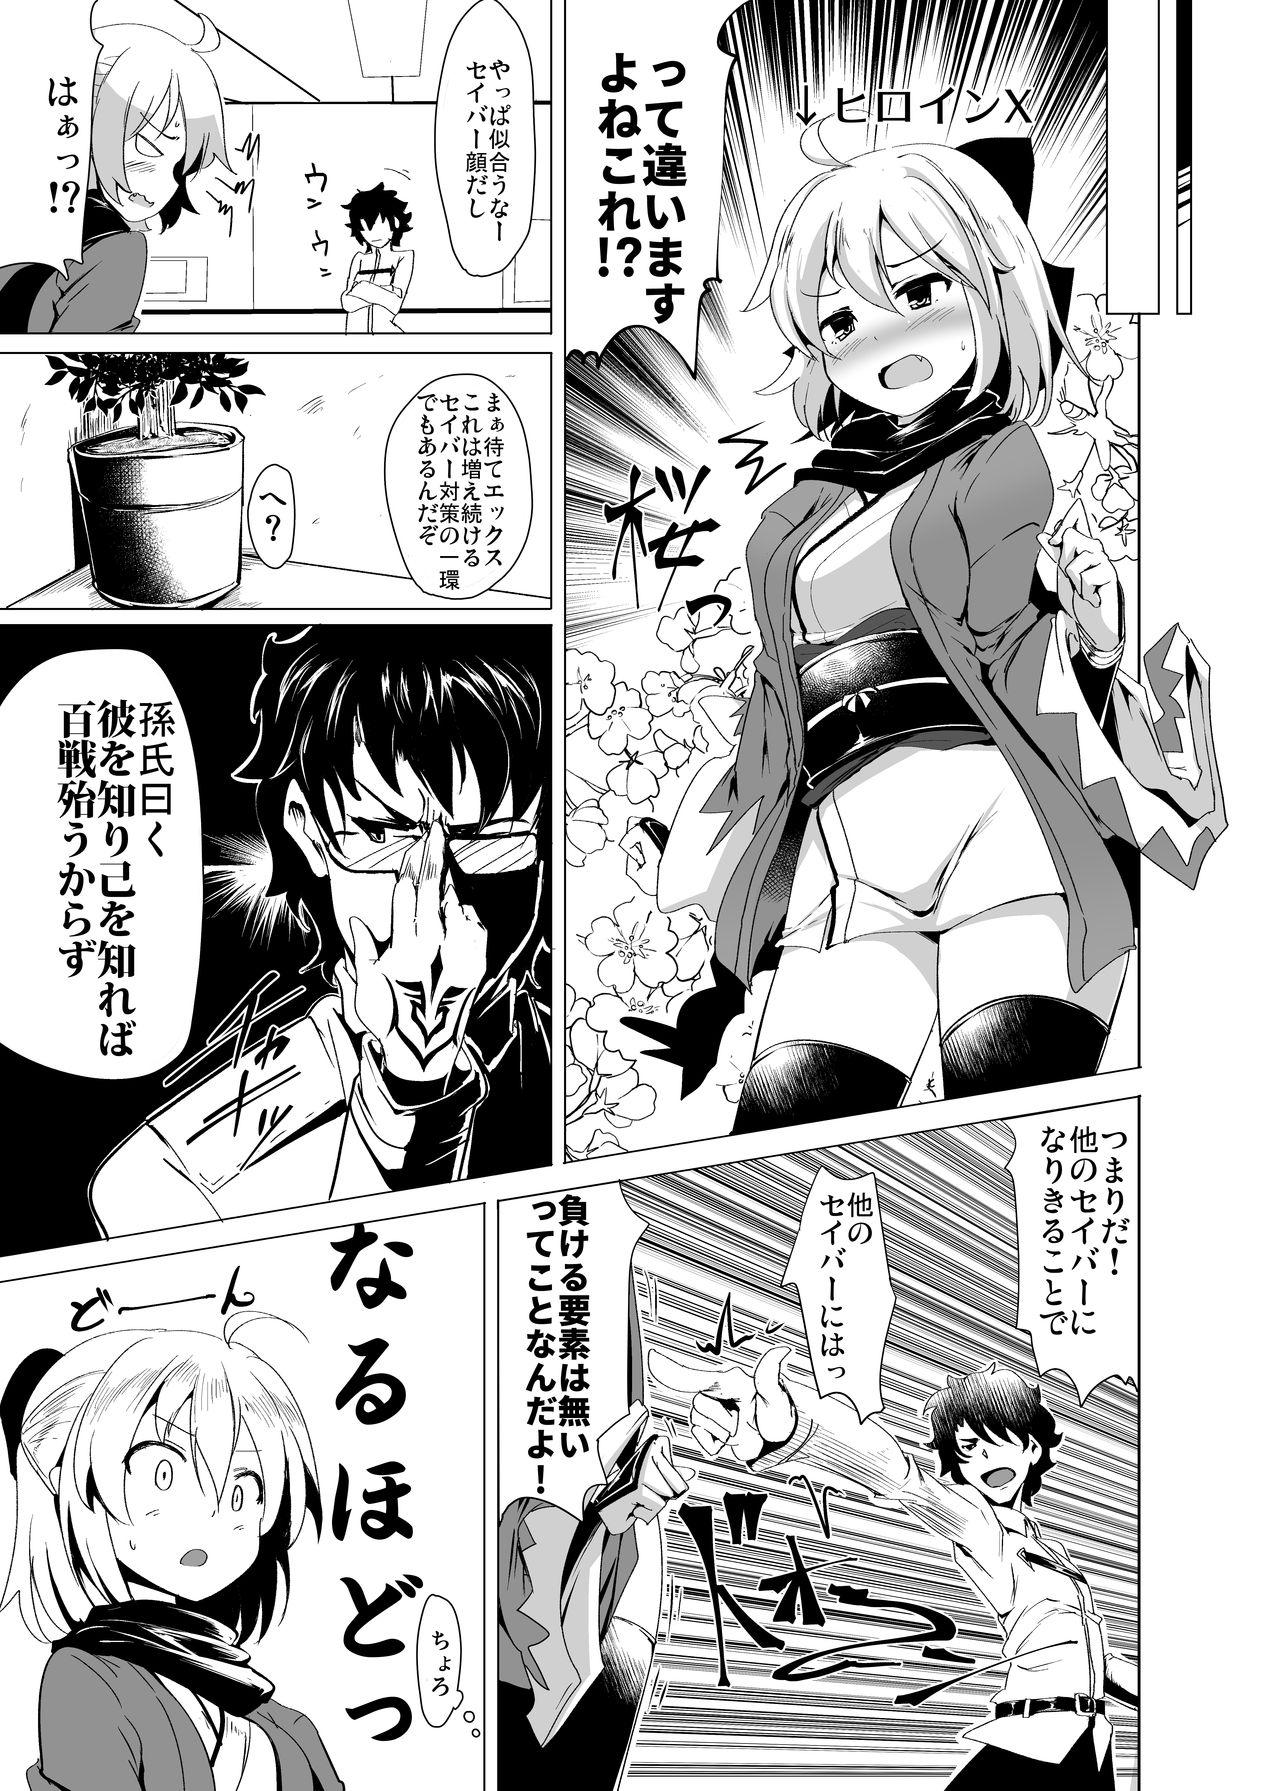 Atm Heroine X to Heroine Sex!! - Fate grand order Wrestling - Page 8